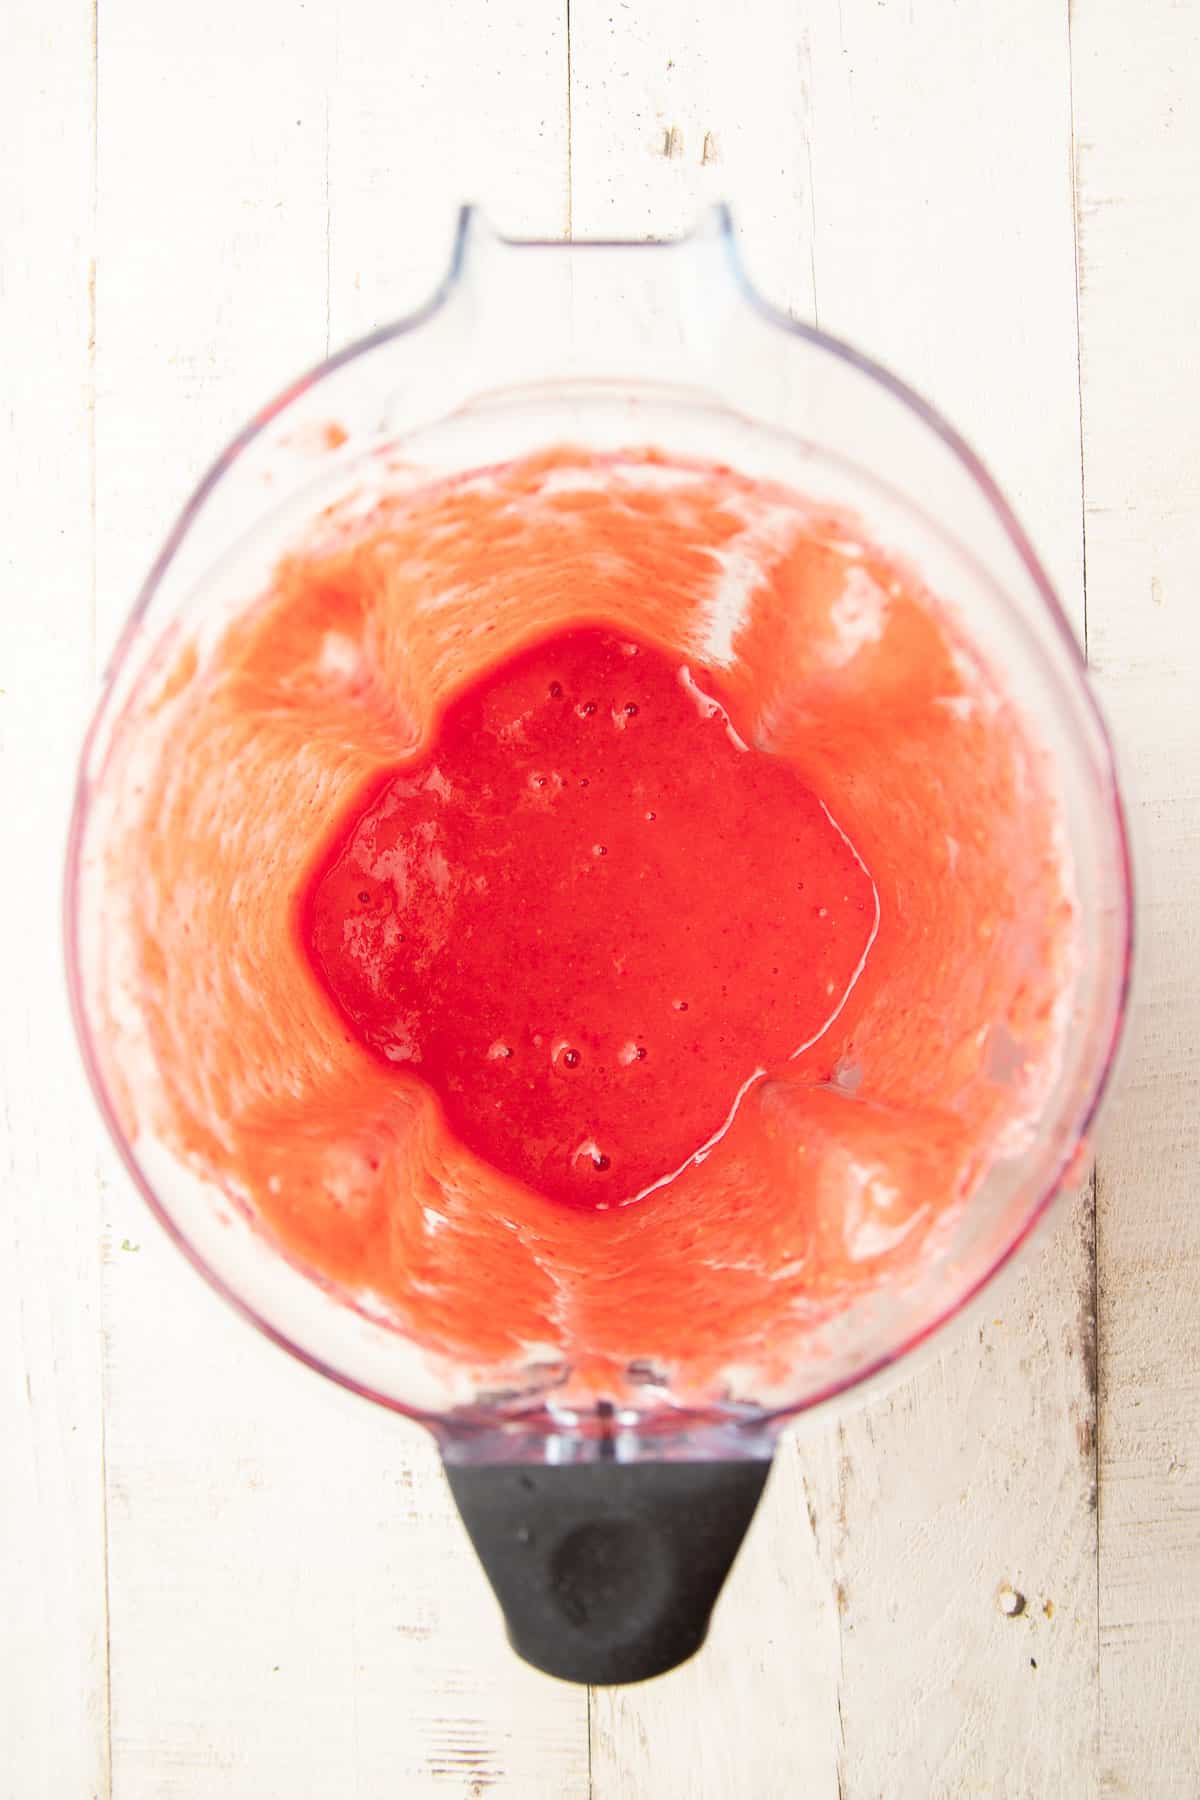 Strawberry puree in a blender.